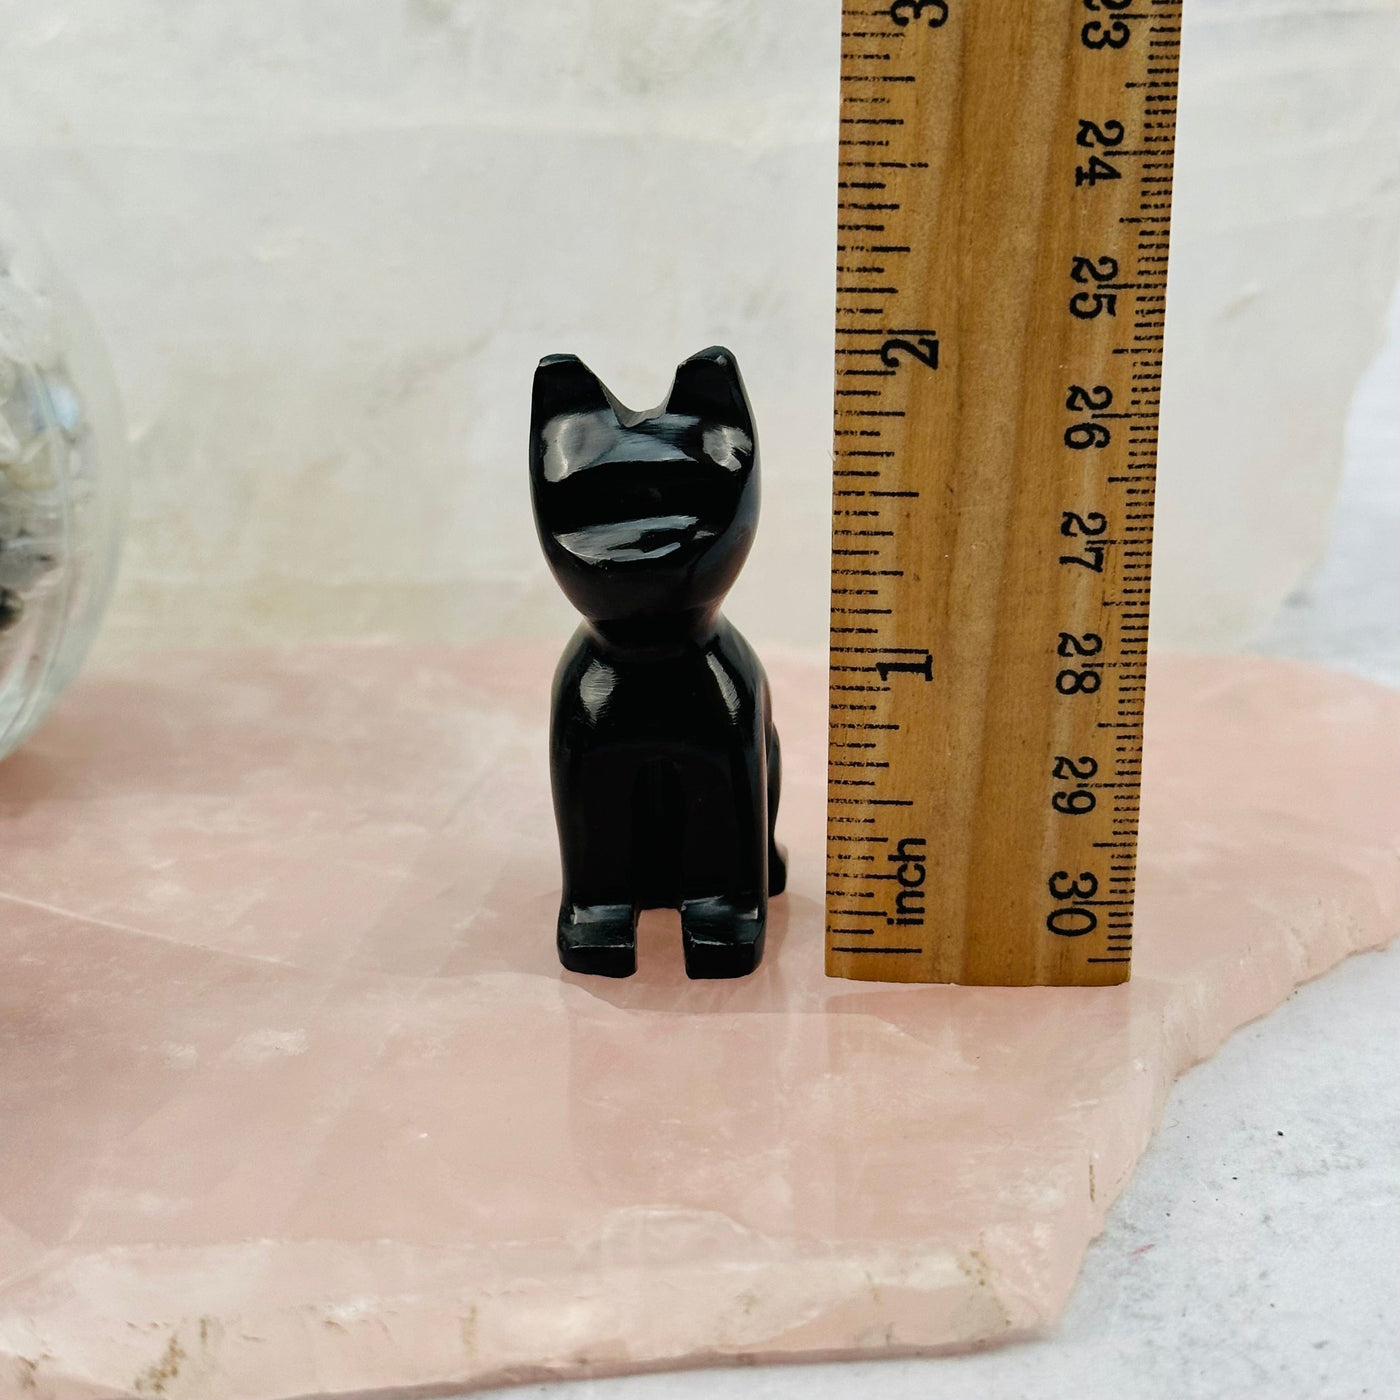 onyx cat next to a ruler for size reference 